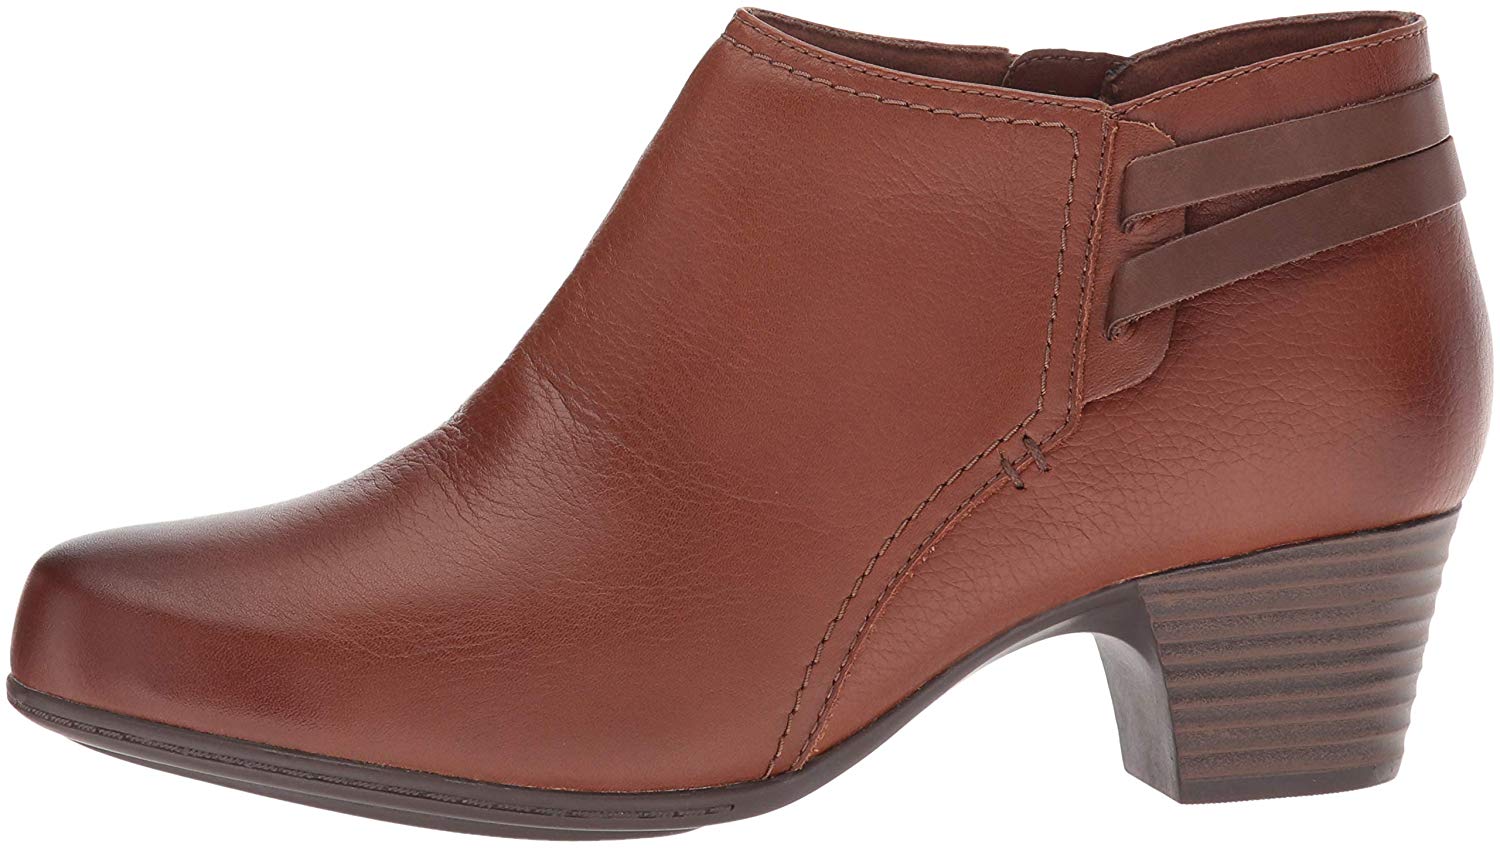 CLARKS Women's Valarie2ashly Fashion Boot, Tan, Size 8.0 G4Af ...